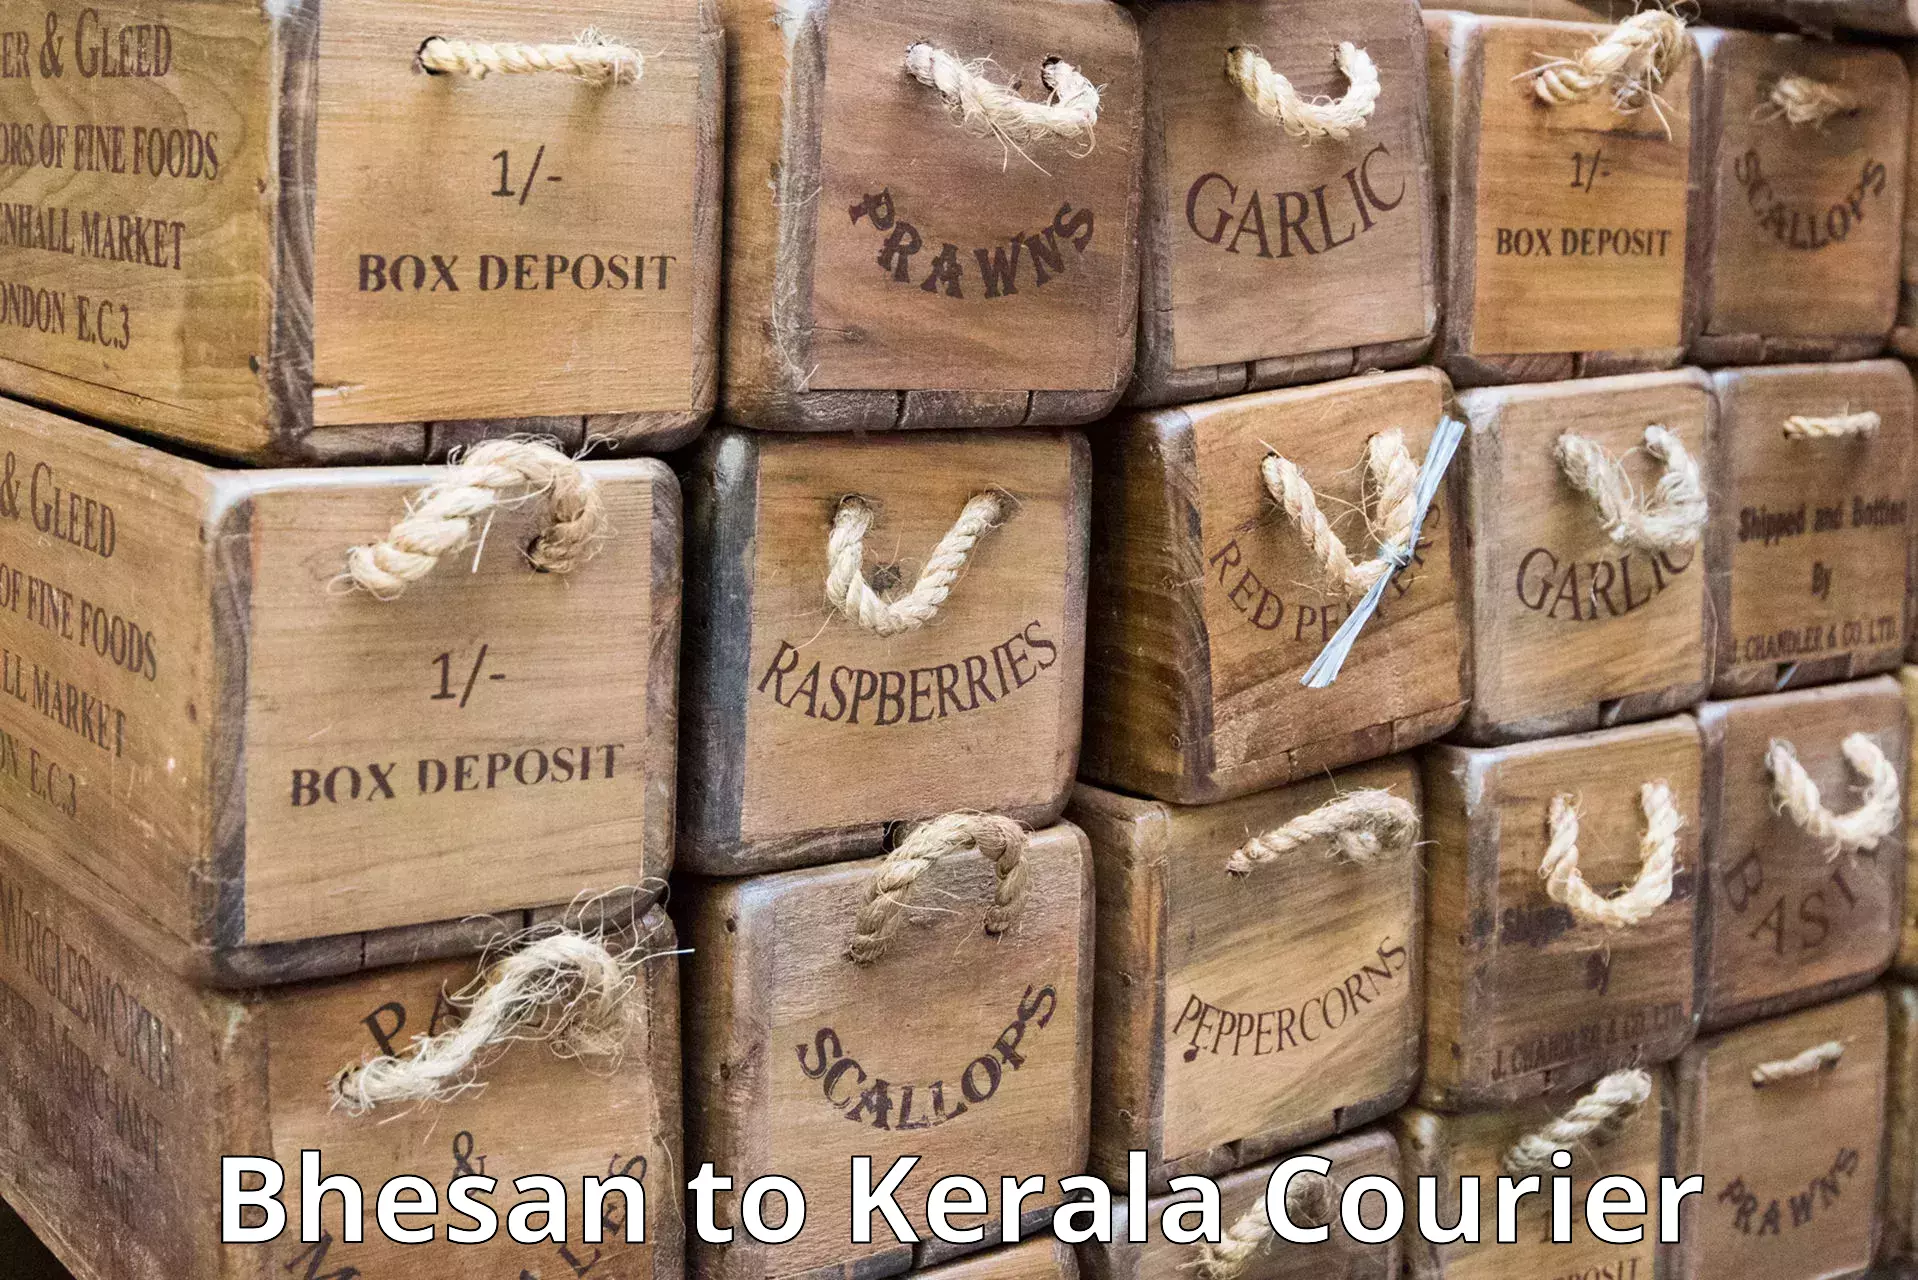 Personal courier services Bhesan to Kochi